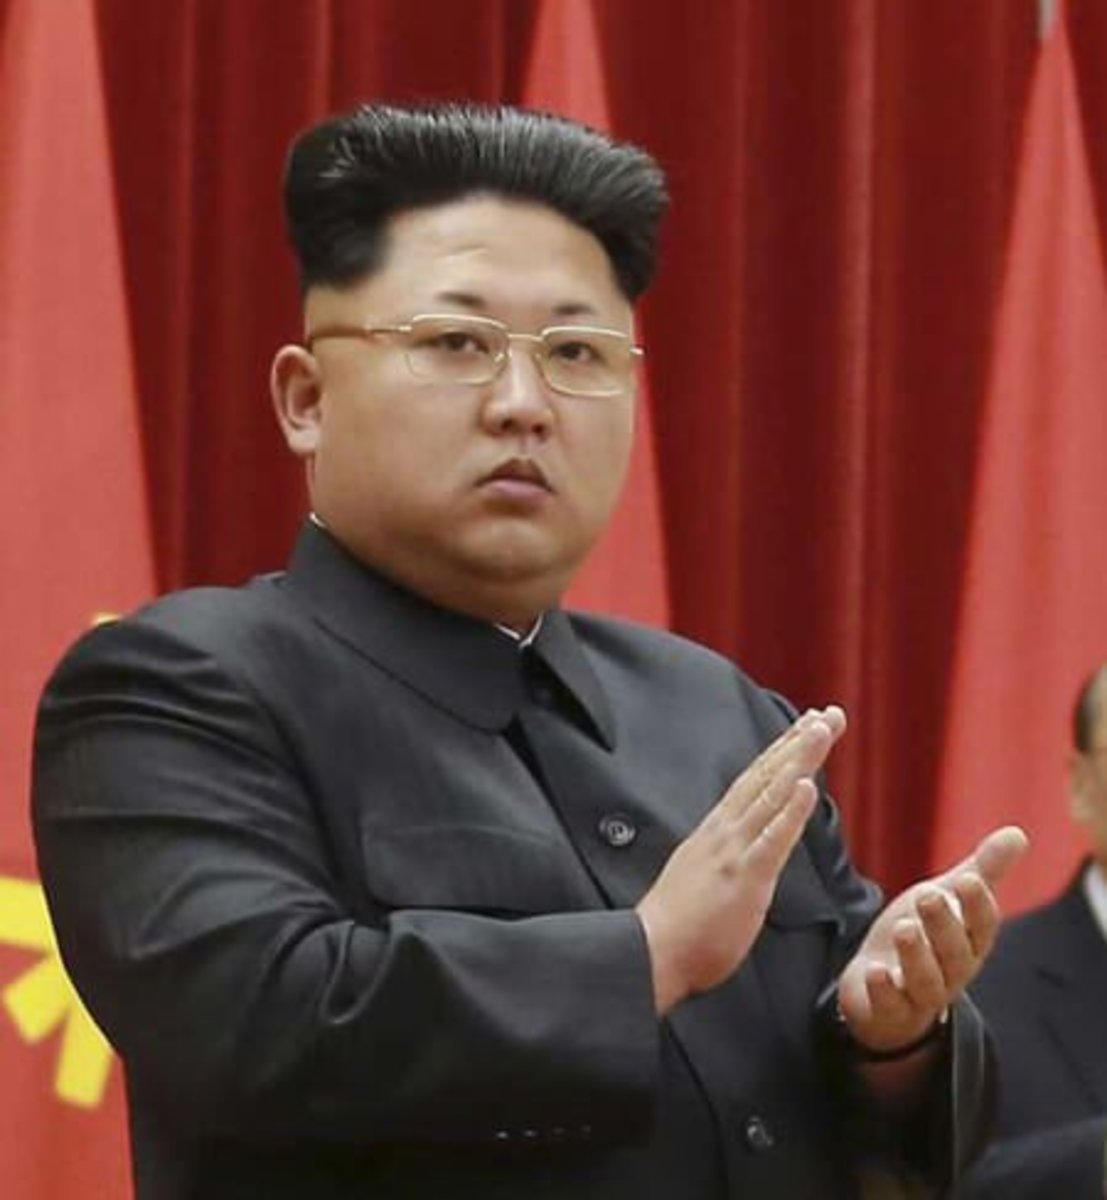 North Korea not forcing 'Dear Leader' haircuts, say experts | CBC News